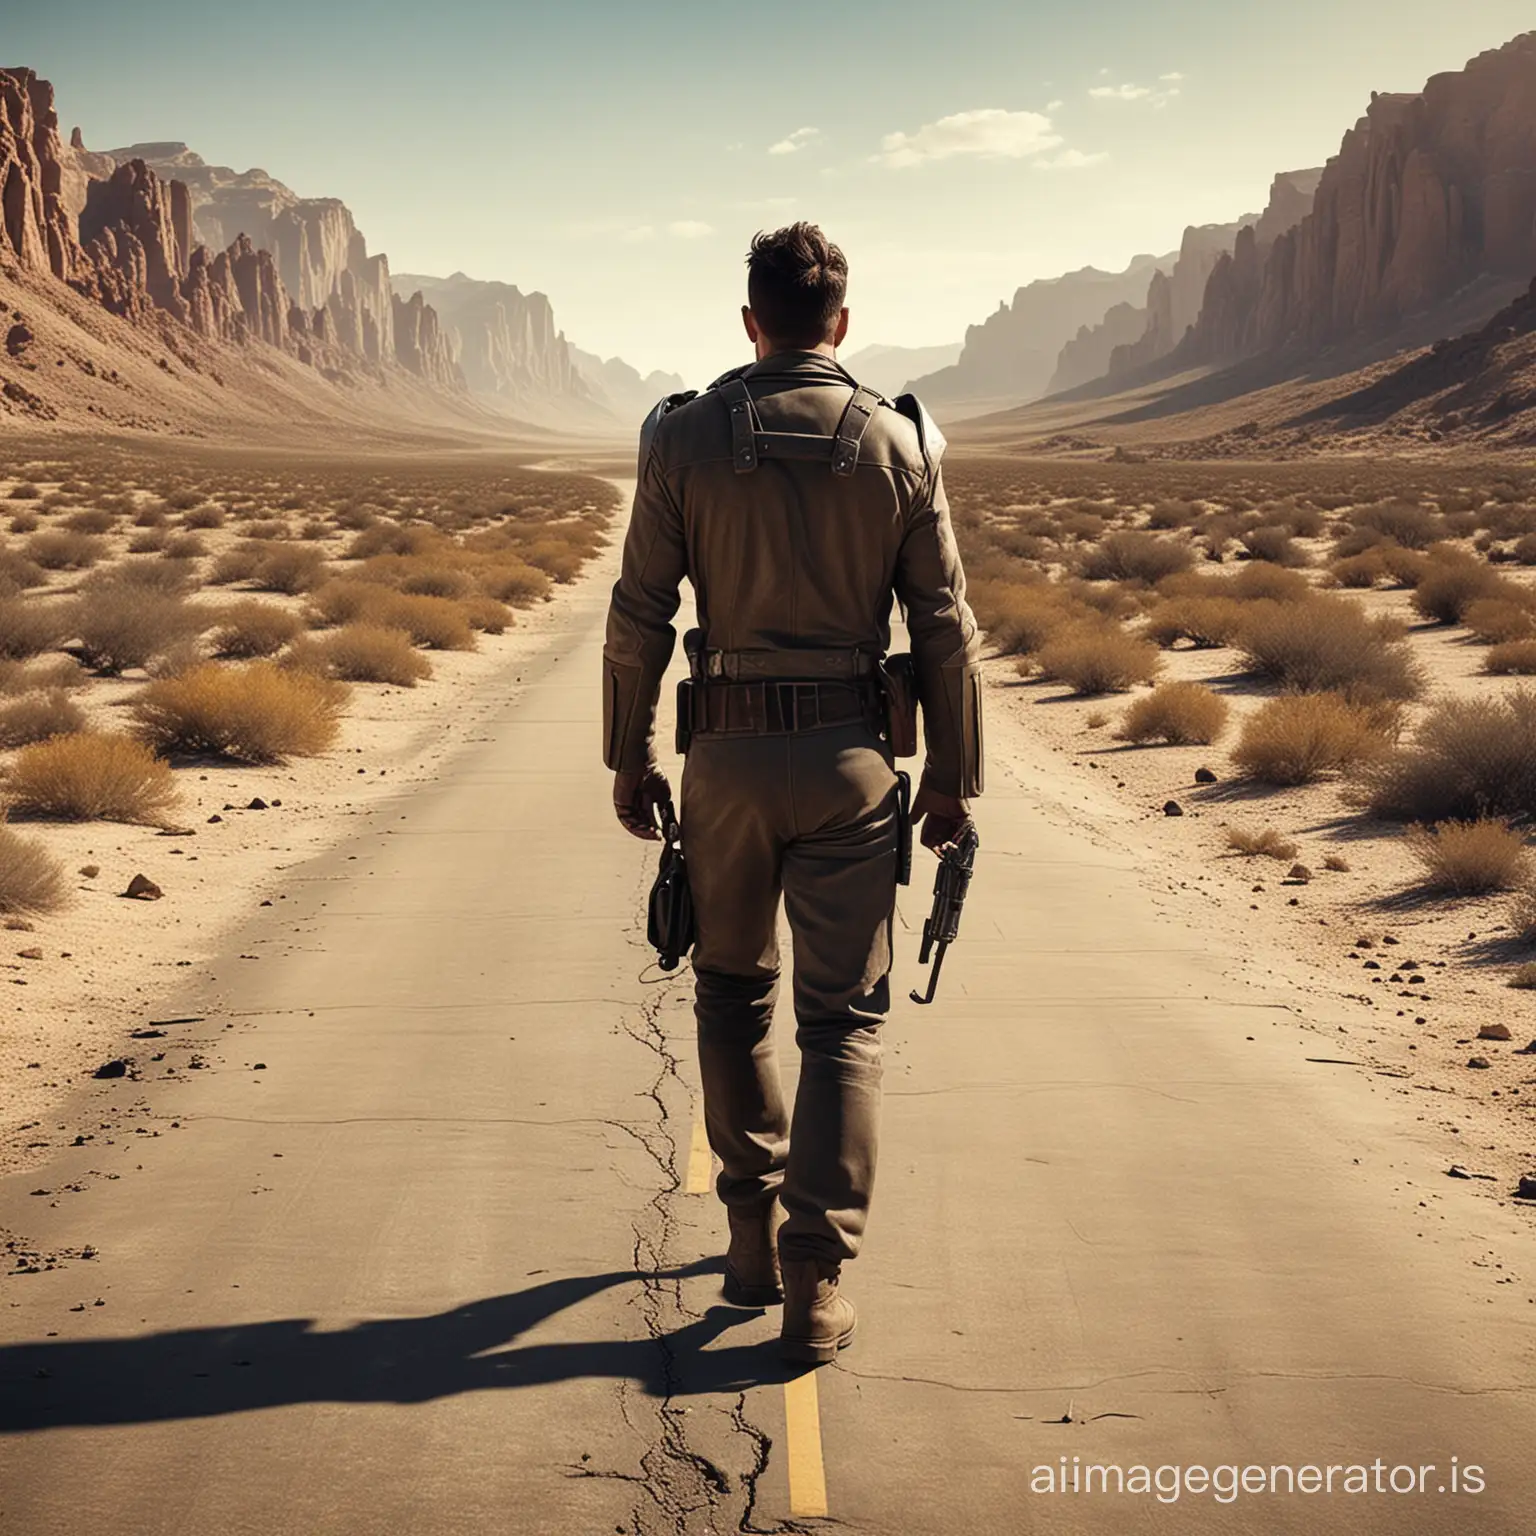 Man-in-his-30s-Walking-Alone-on-Desert-Road-in-Fallout-Style